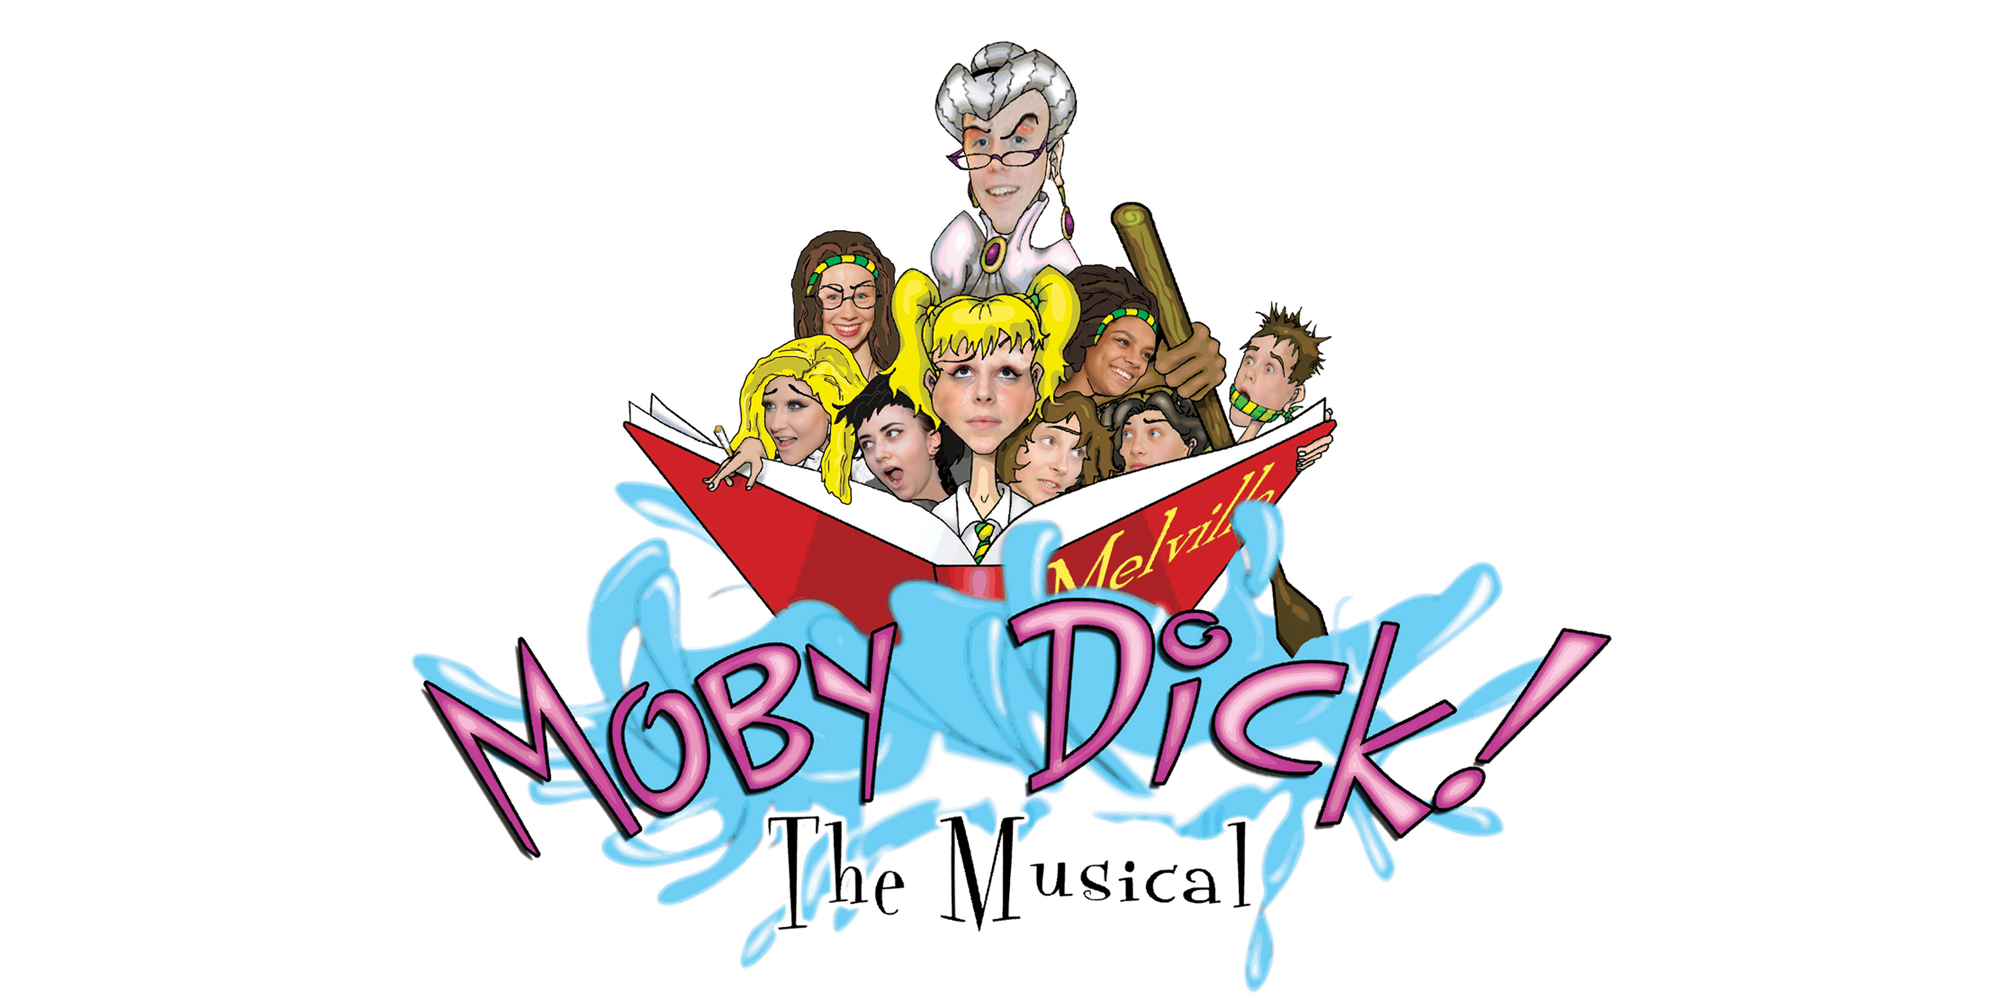 AAODS present Moby Dick! The Musical.